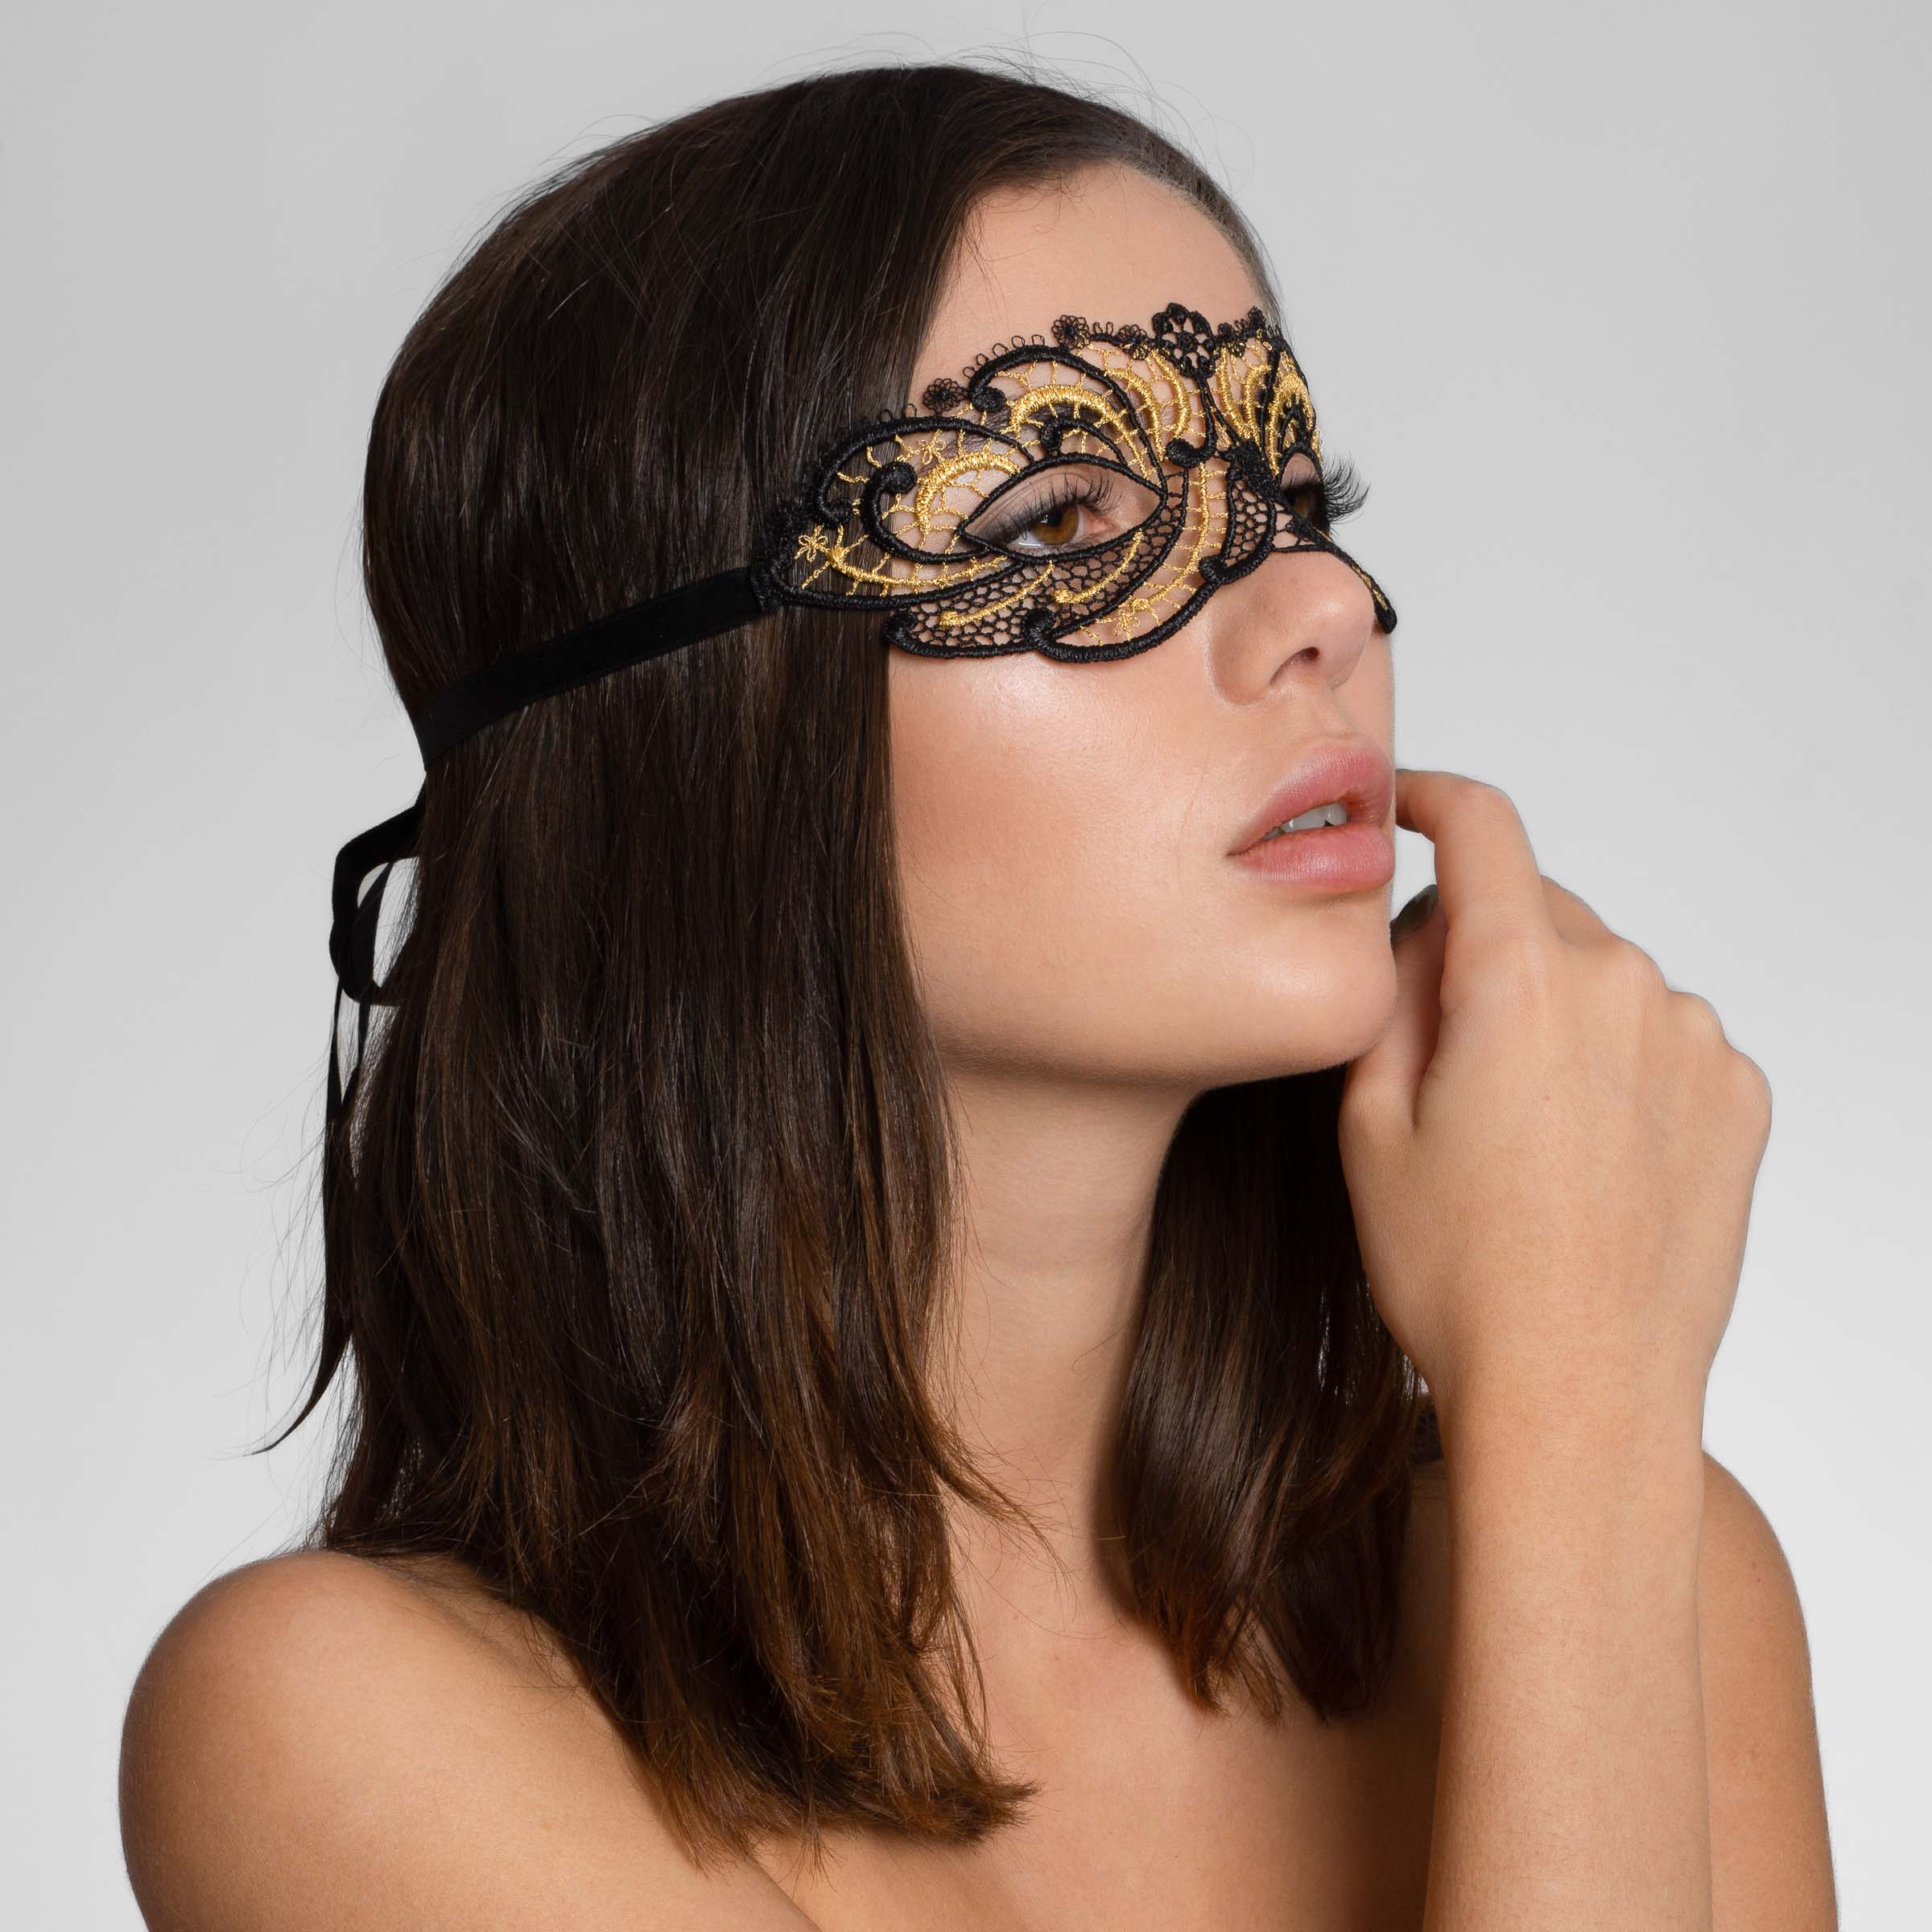 Queen of Love Mask - Black/Gold